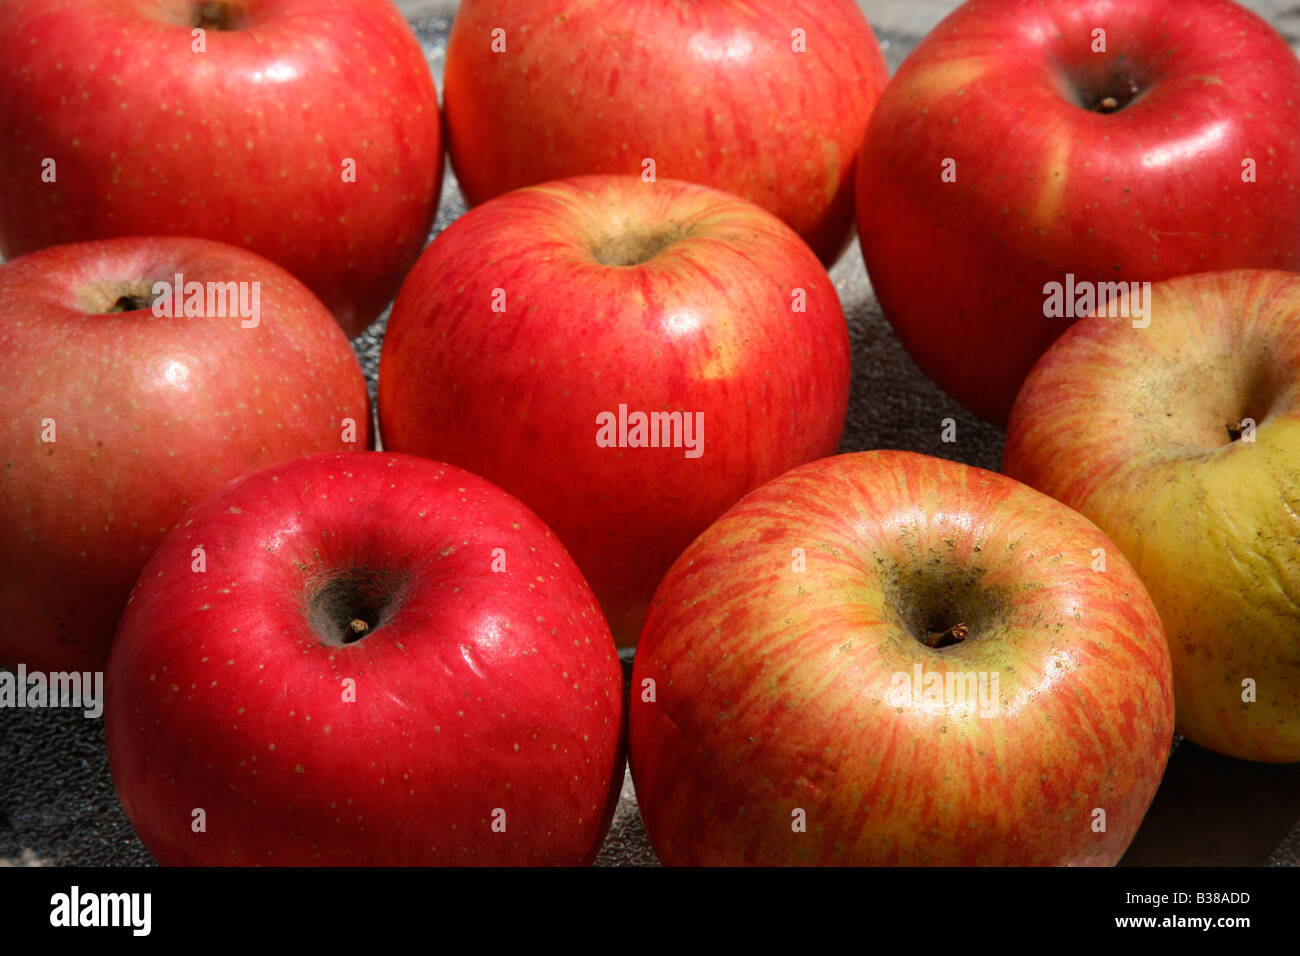 Red Apples Stock Photo